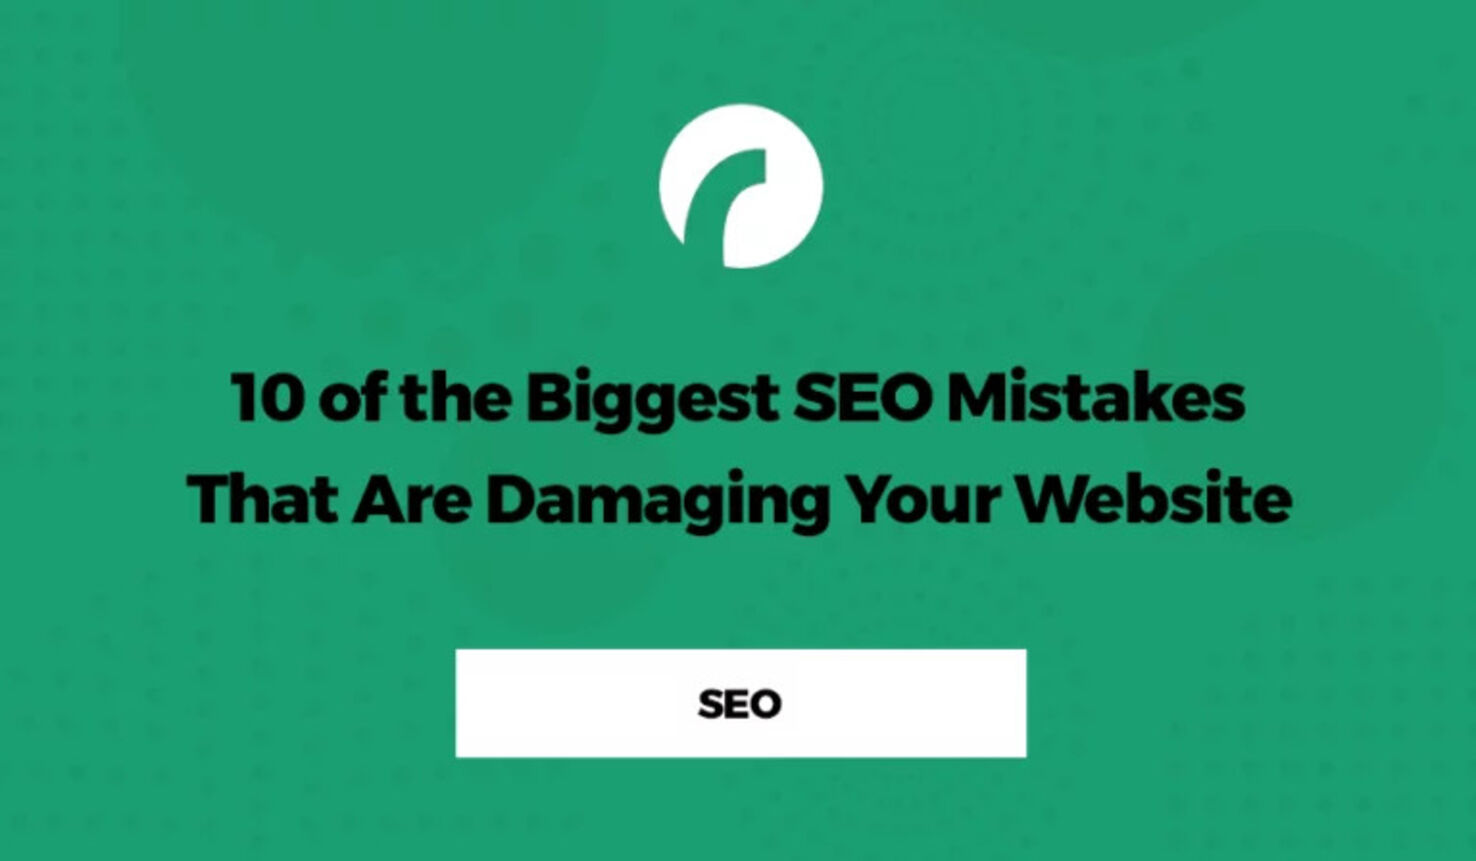 Biggest SEO Mistakes That Are Damaging Your Website